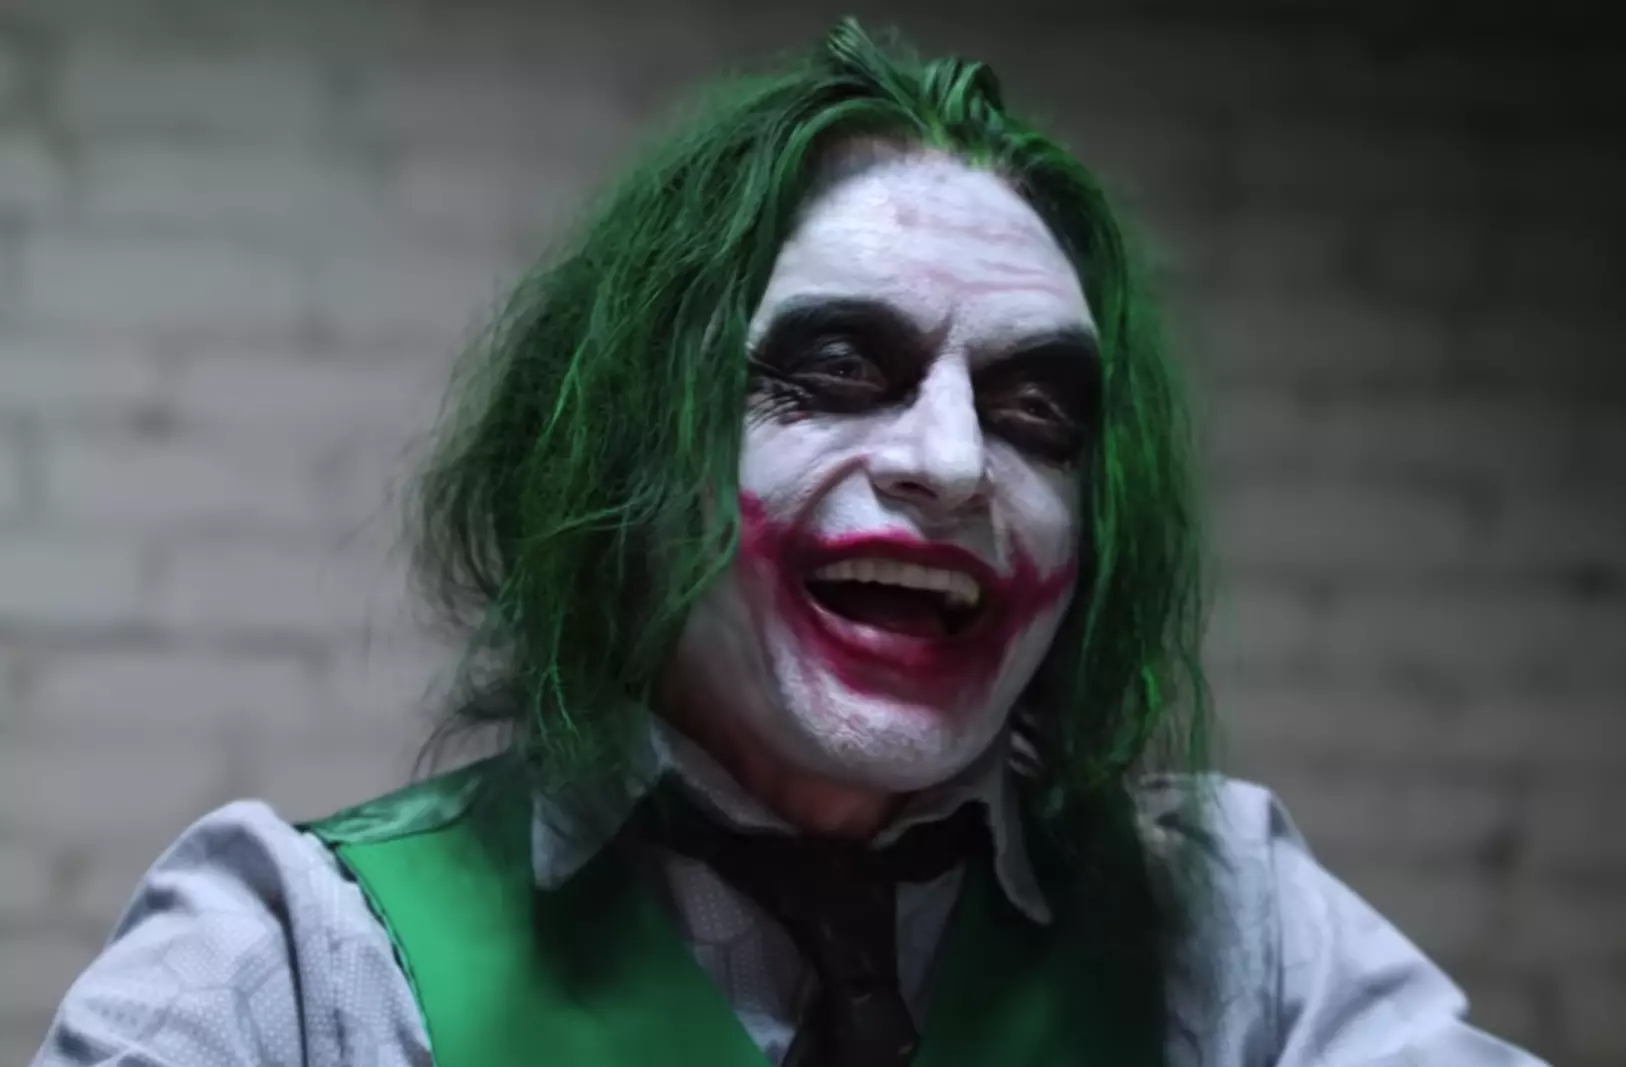 Tommy Wiseau's Recreated a 'Dark Knight' Scene and It's Insane